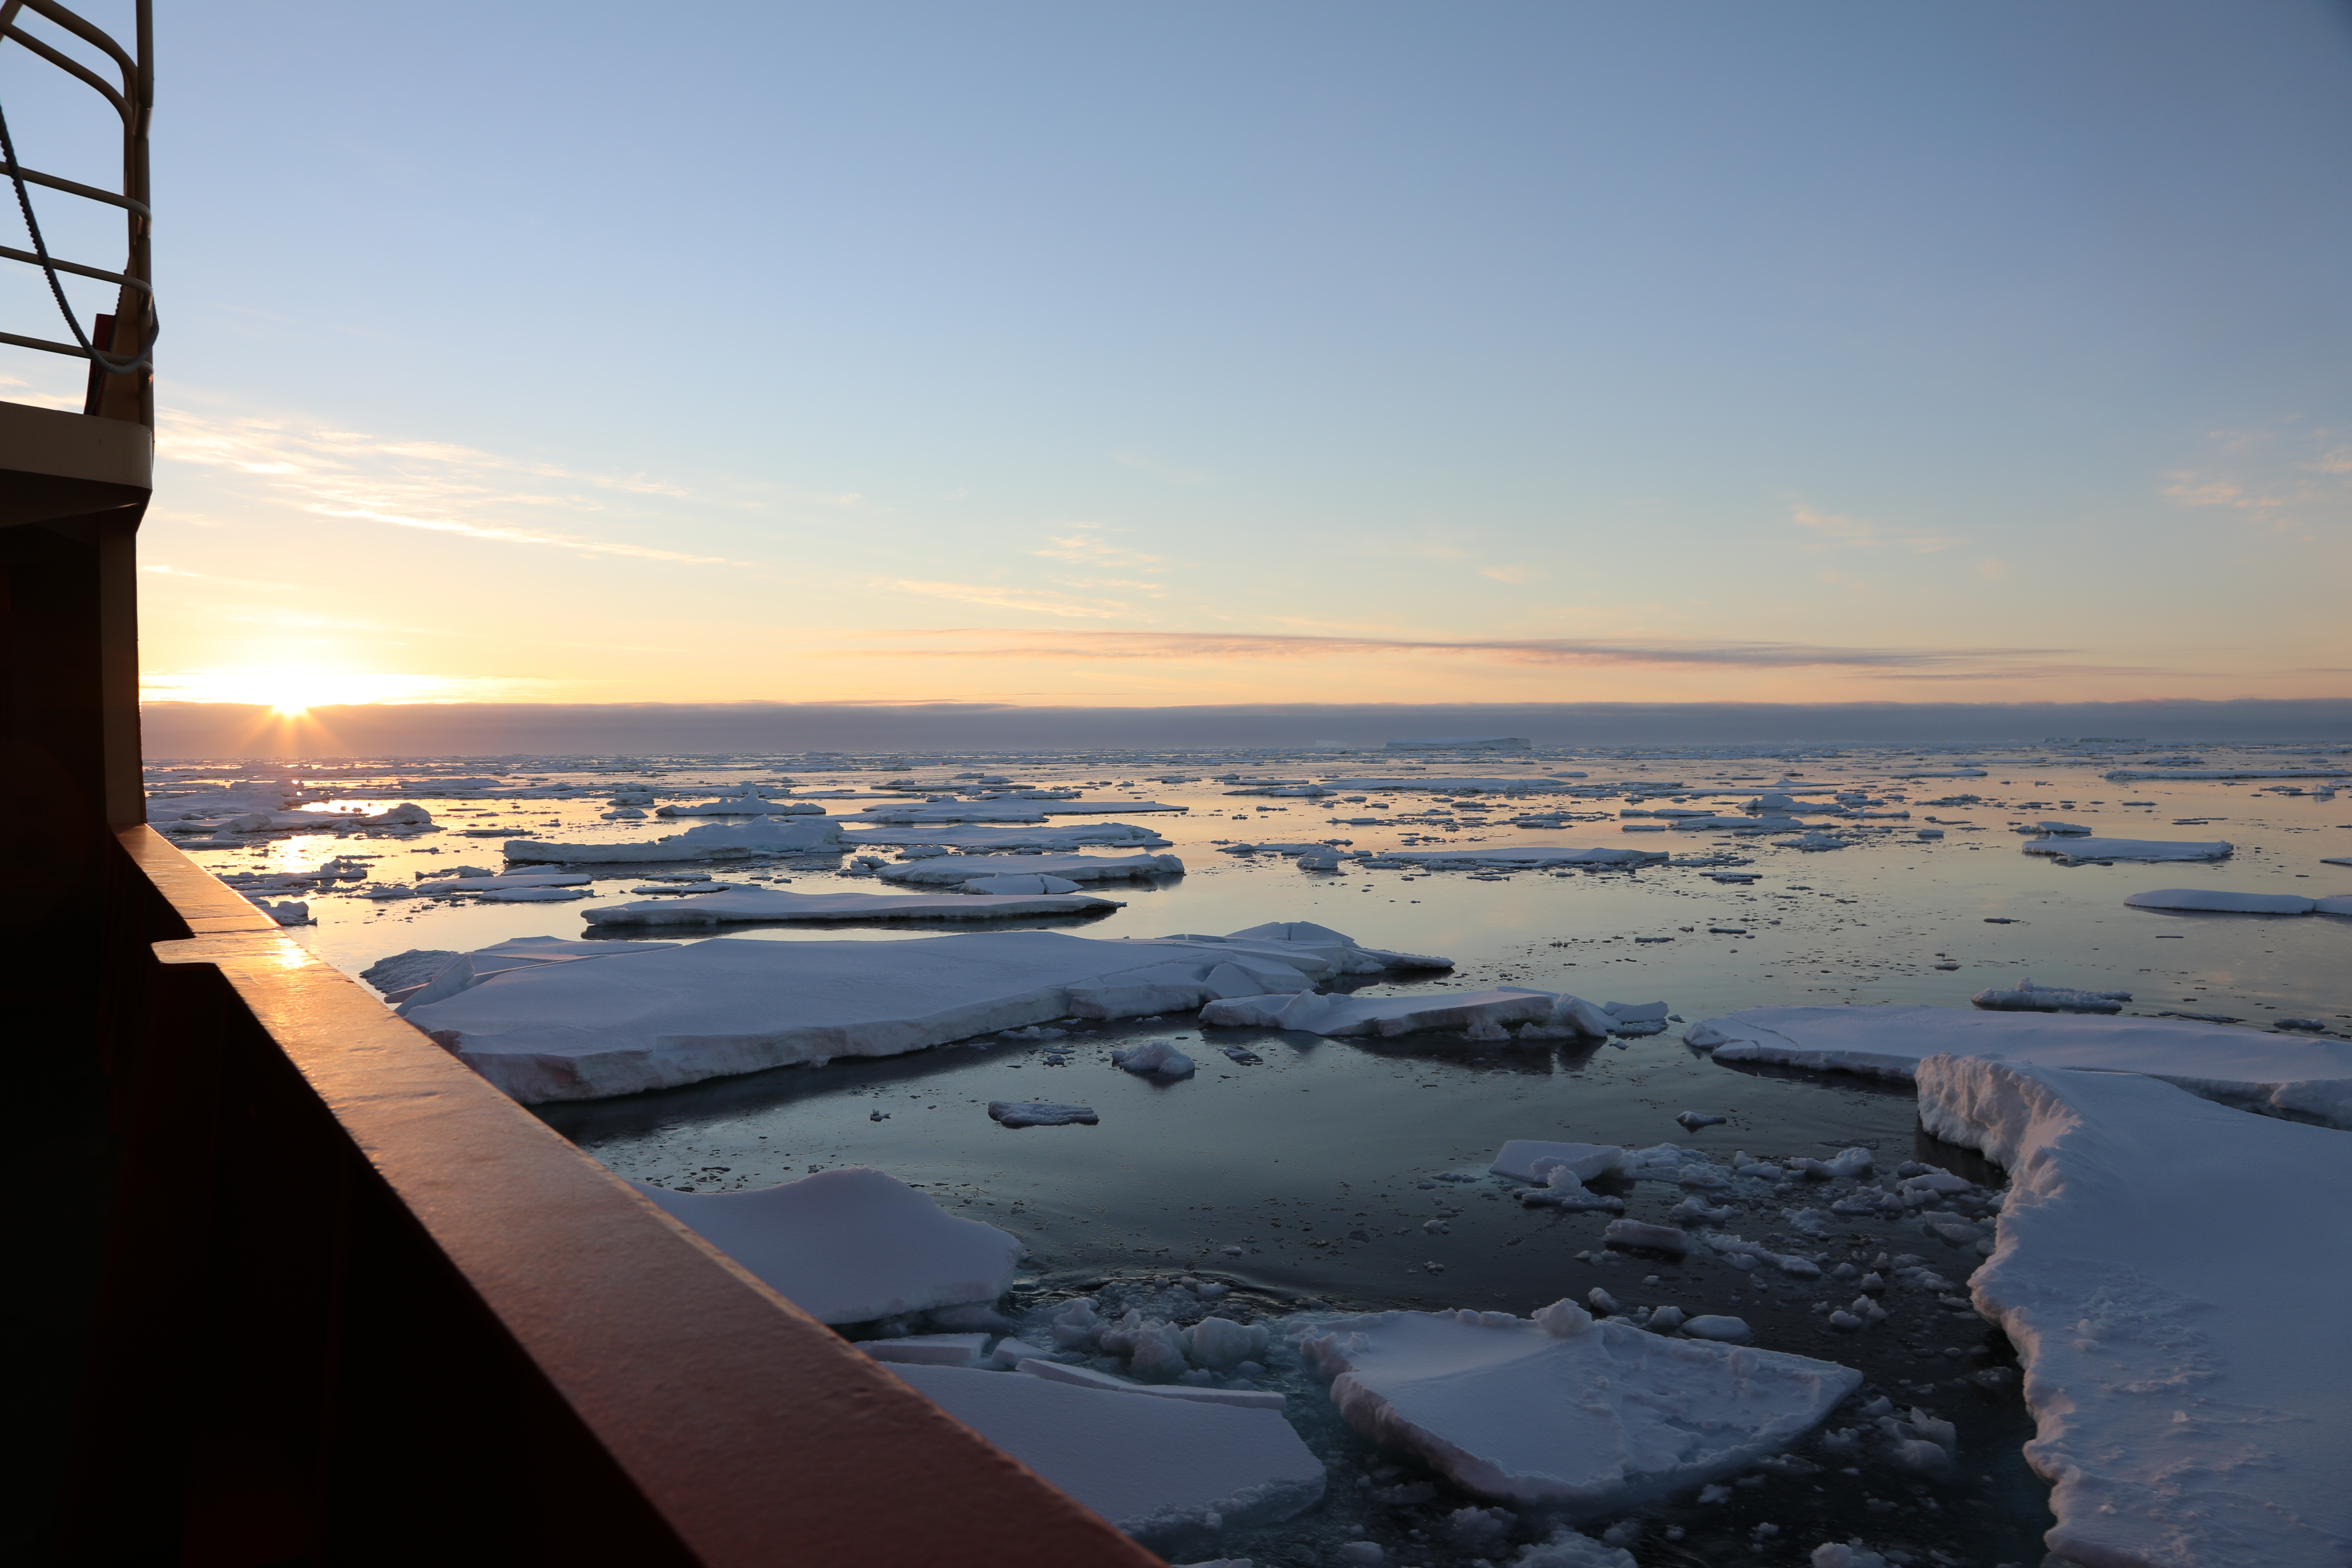 Sea ice viewed from the ship